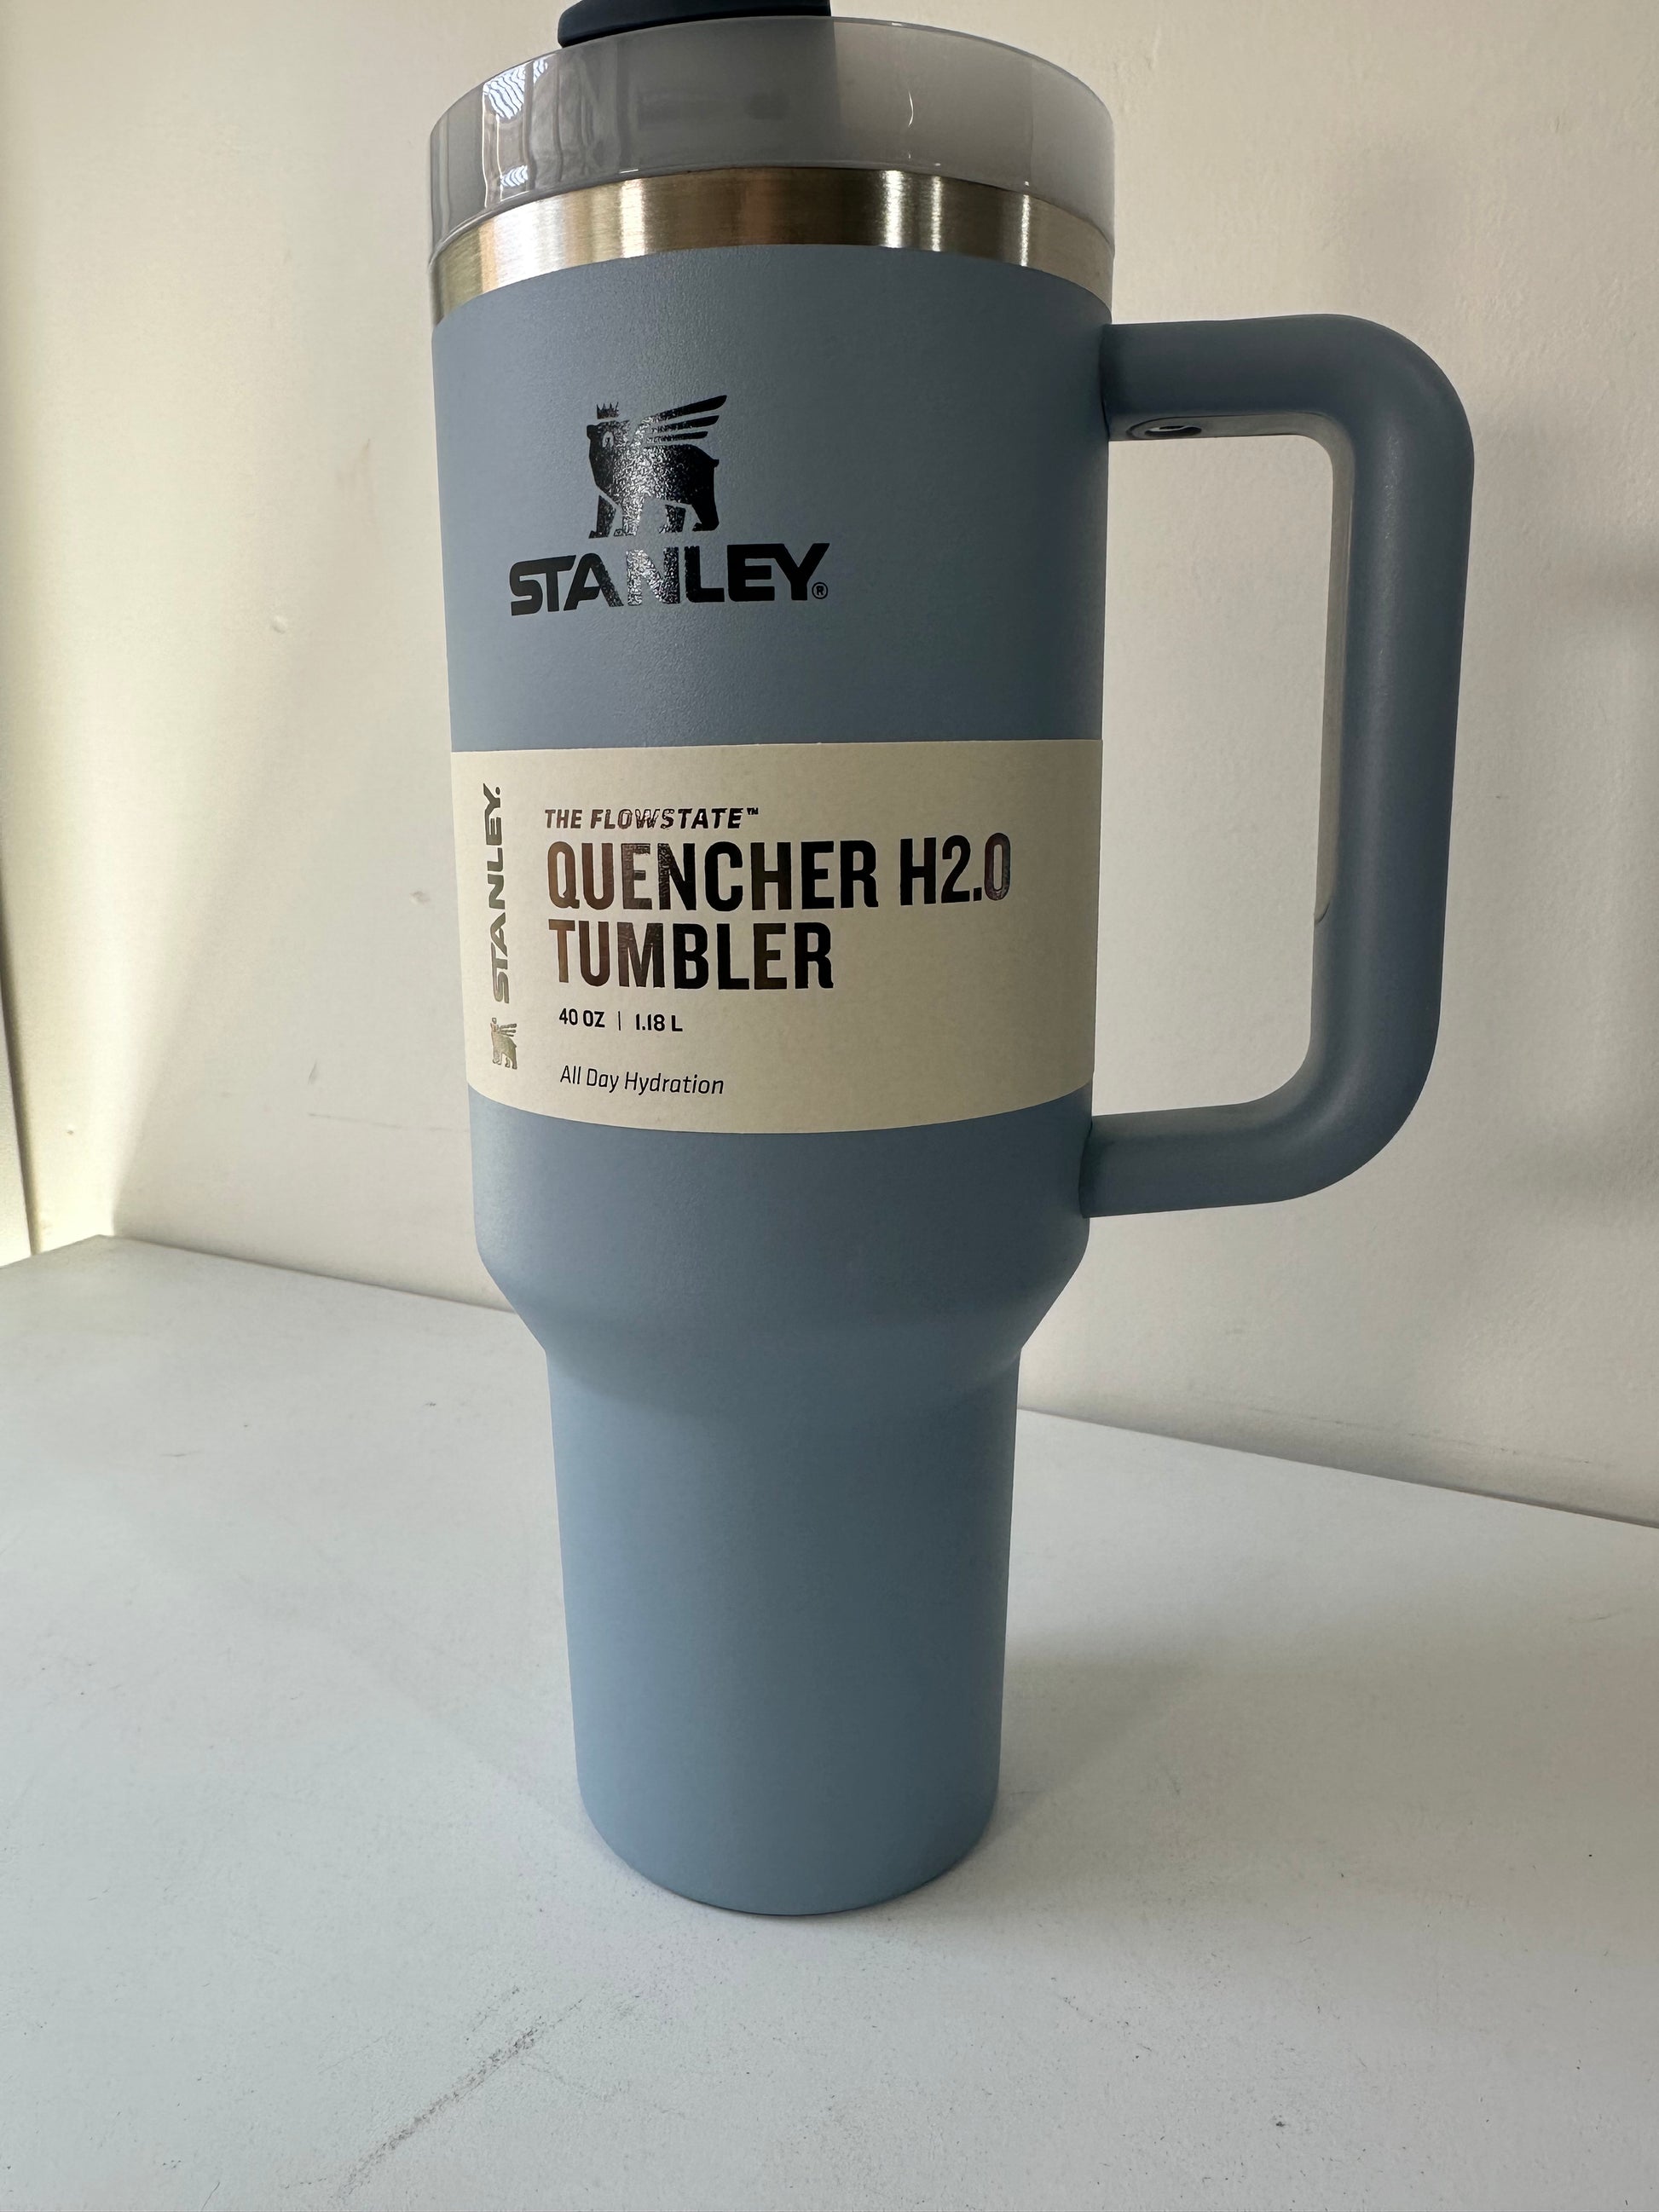 A solid #Stanley 40oz quencher tumbler color! #stanleycup #h2o